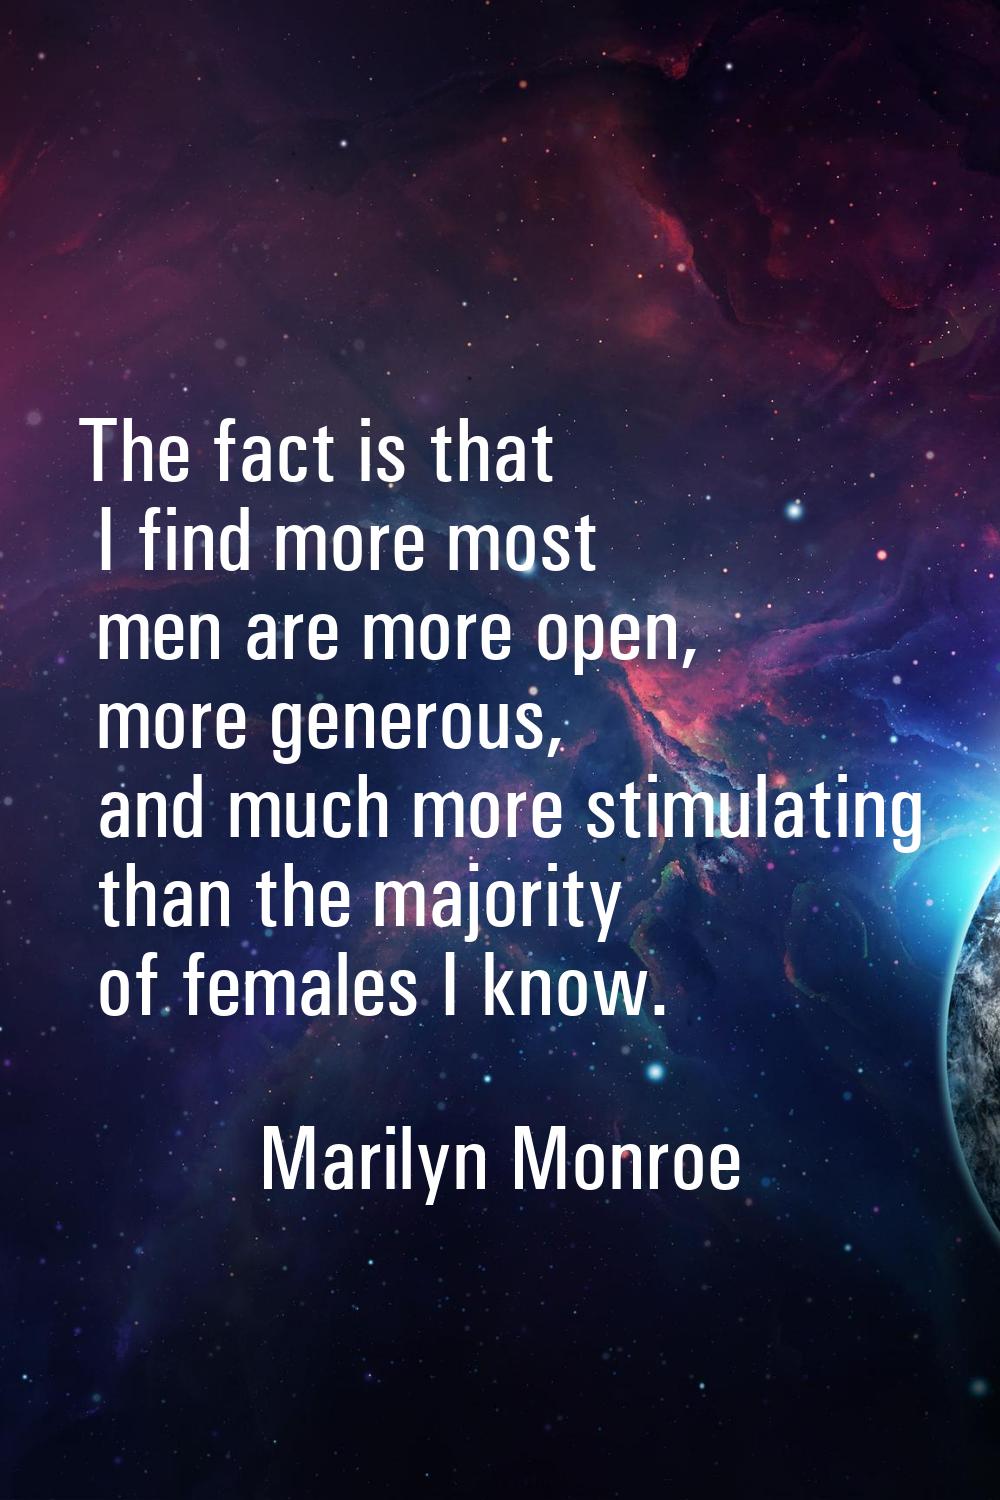 The fact is that I find more most men are more open, more generous, and much more stimulating than 